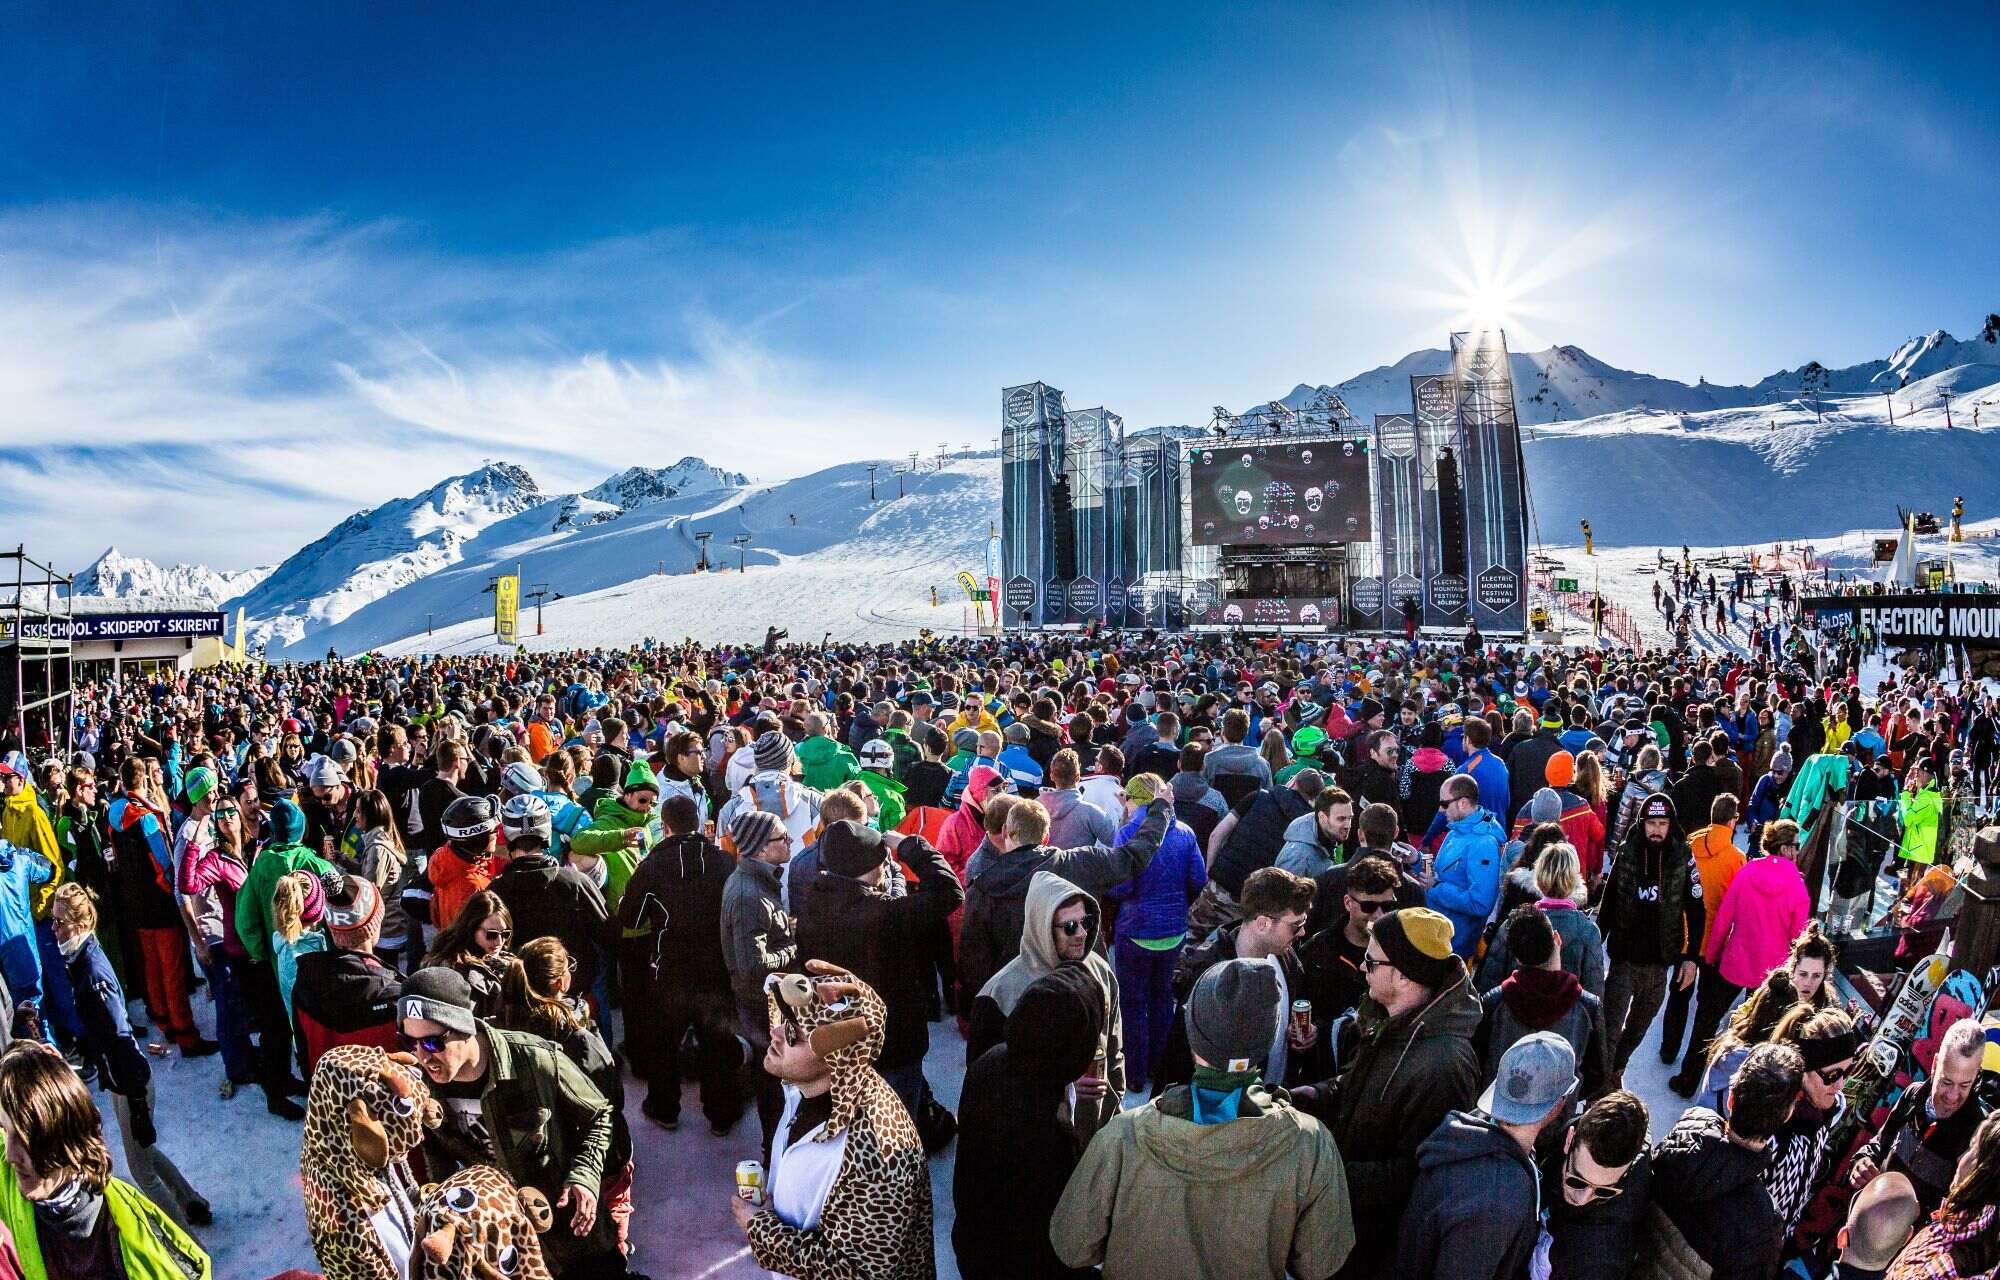 18-facts-about-electric-mountain-festival